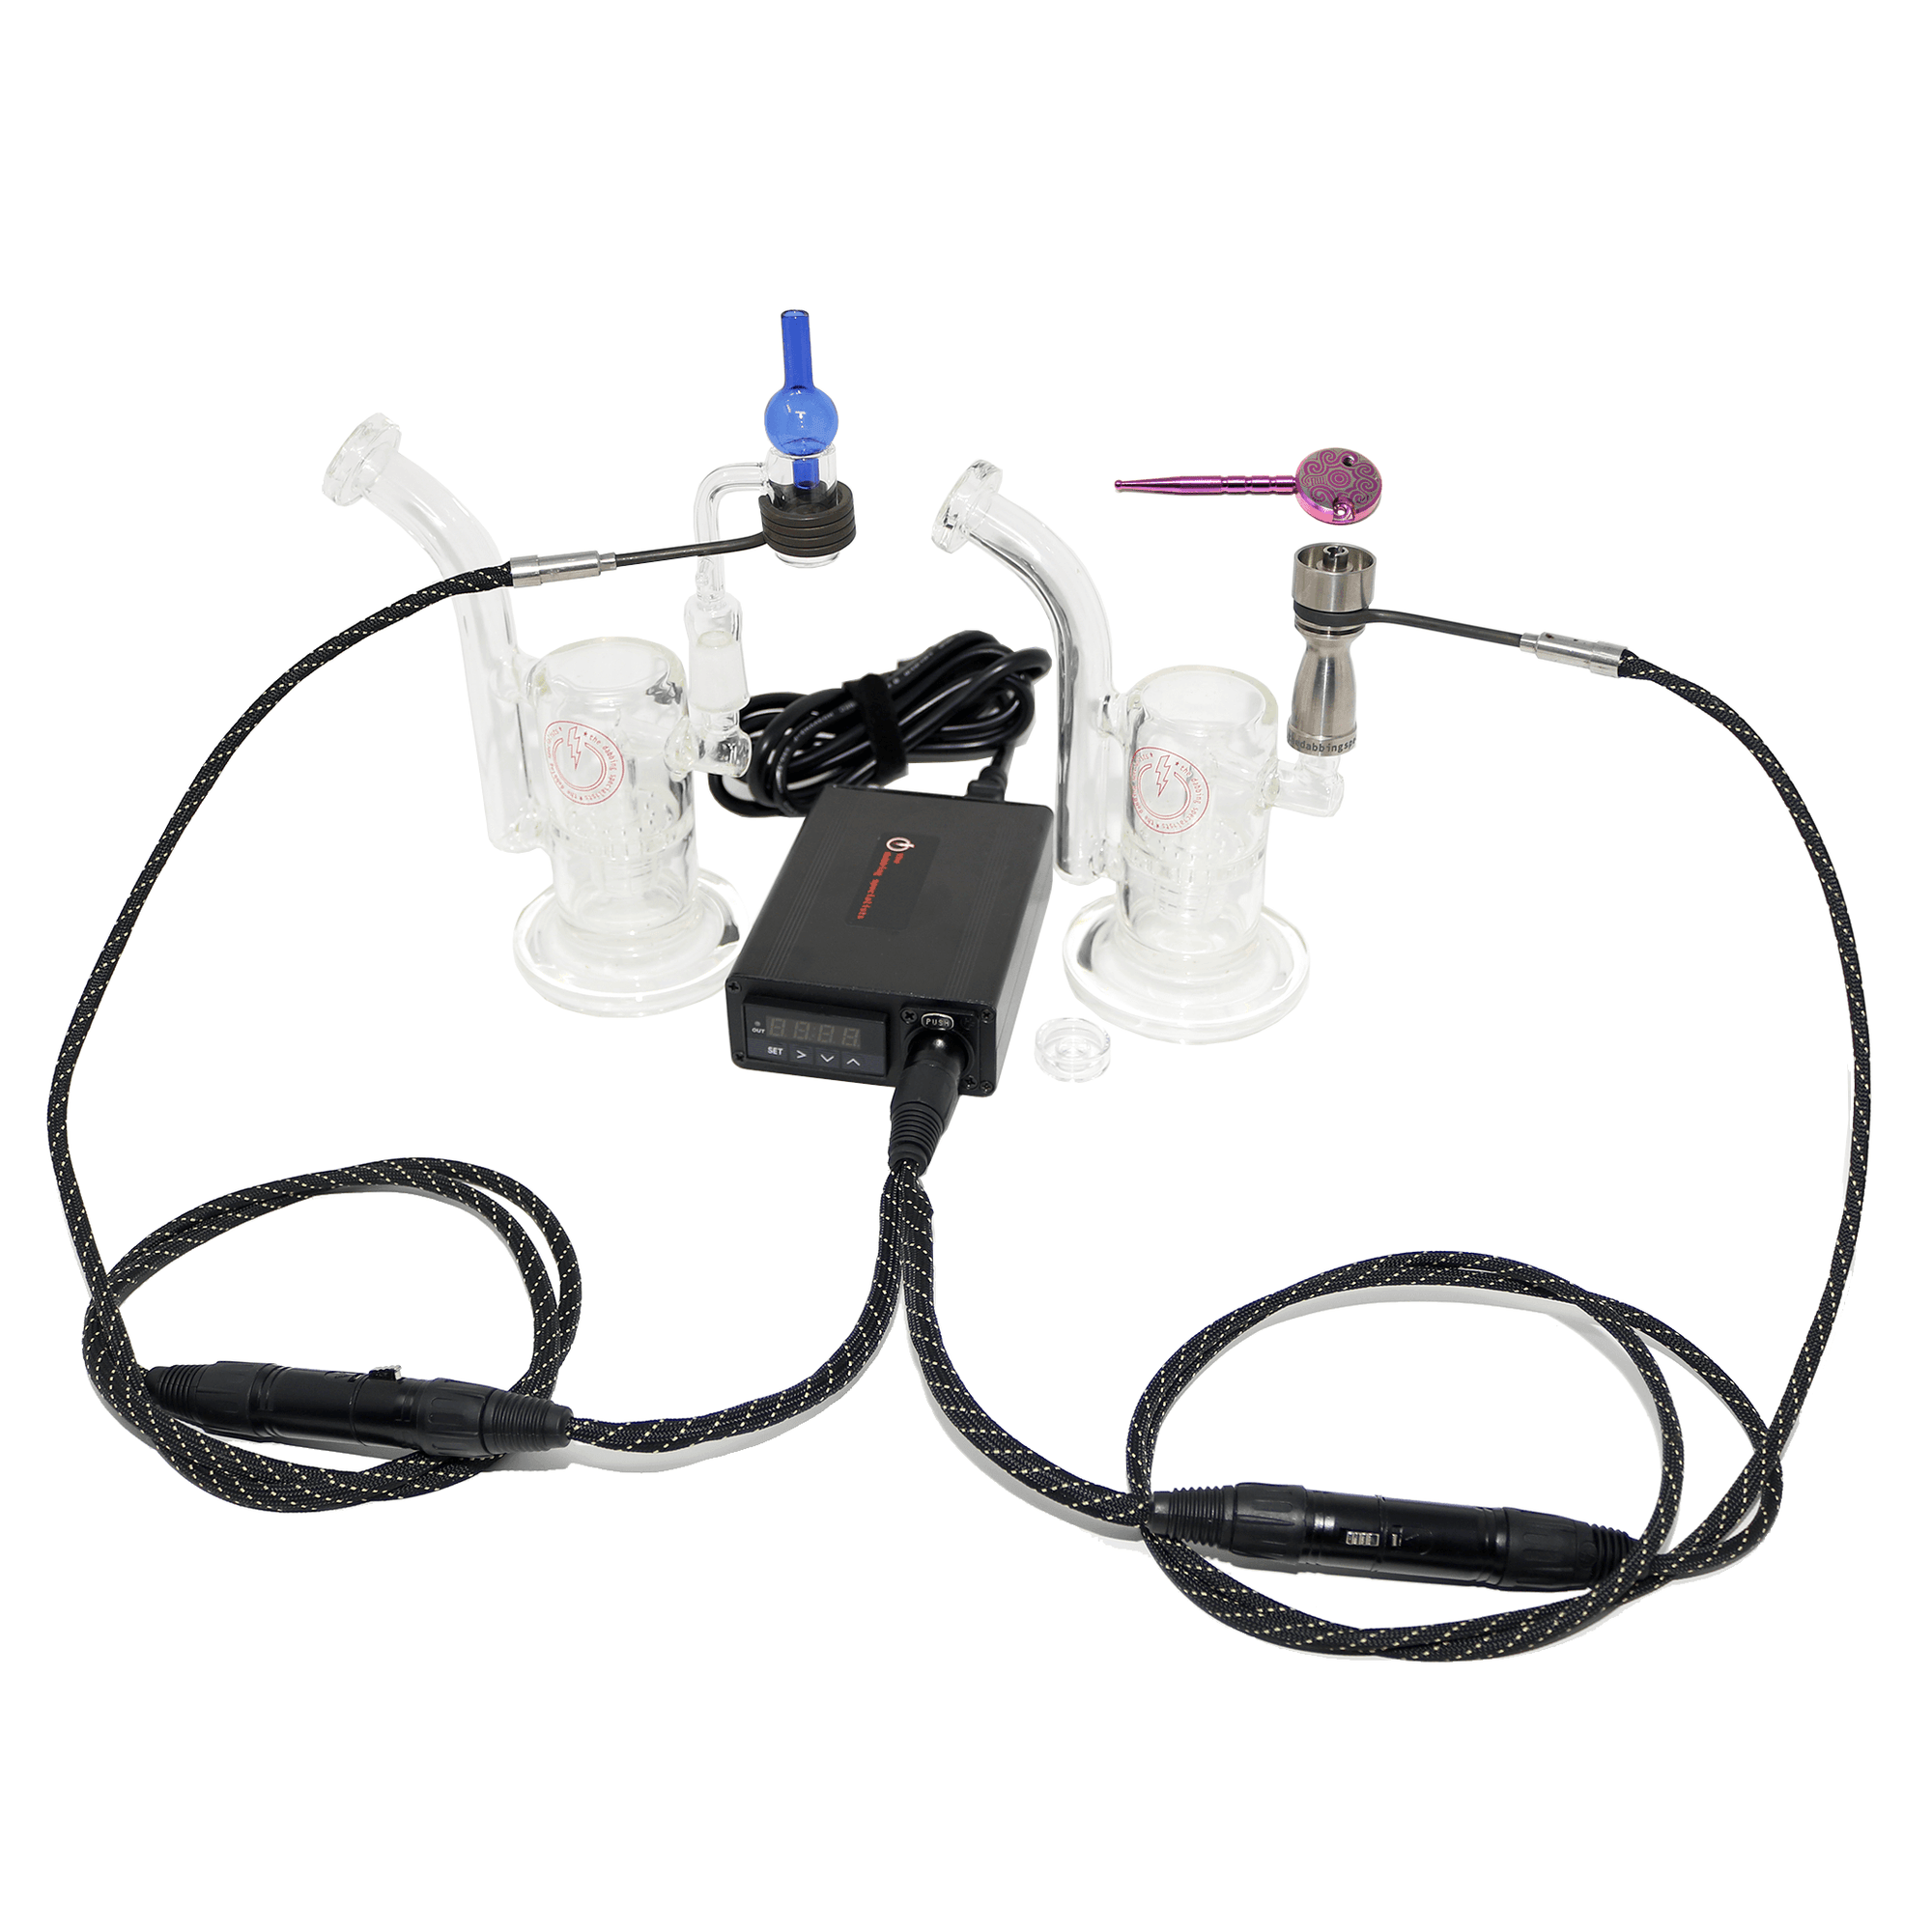 Portable Enail Dual Dabbing Kit | Complete Kit View | the dabbing specialists